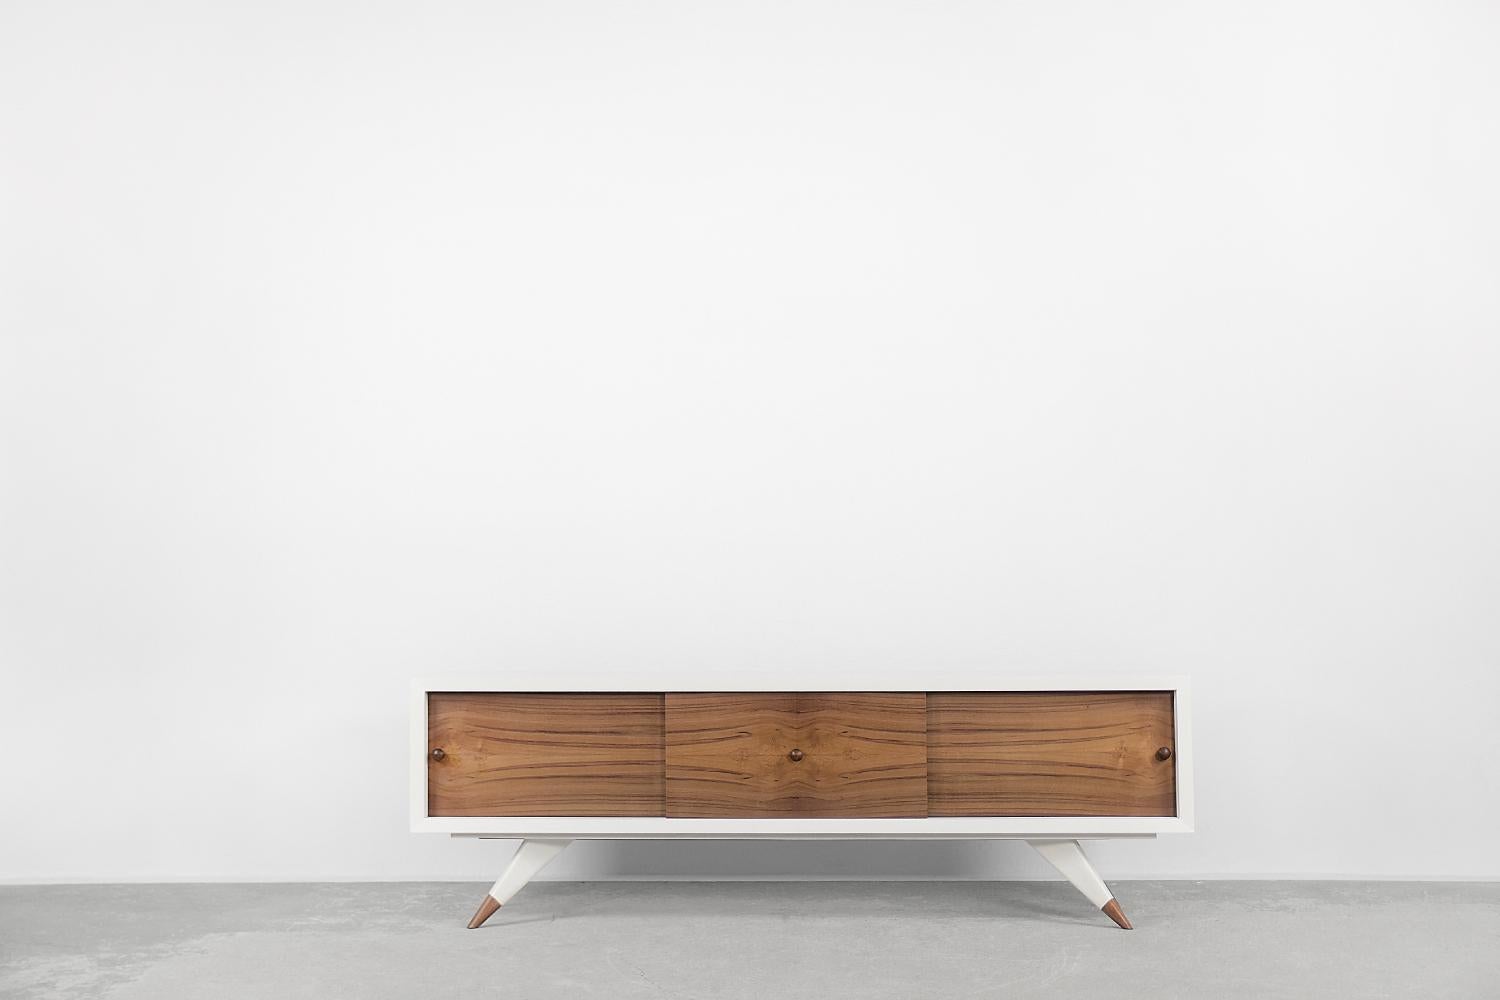 This modernist sideboard was manufactured in Sweden in the 1970s. It was finished with white lacquered teak wood. The front consists of three sliding doors in a natural shade of teak wood. Inside there are shelves and a spacious, empty space. The